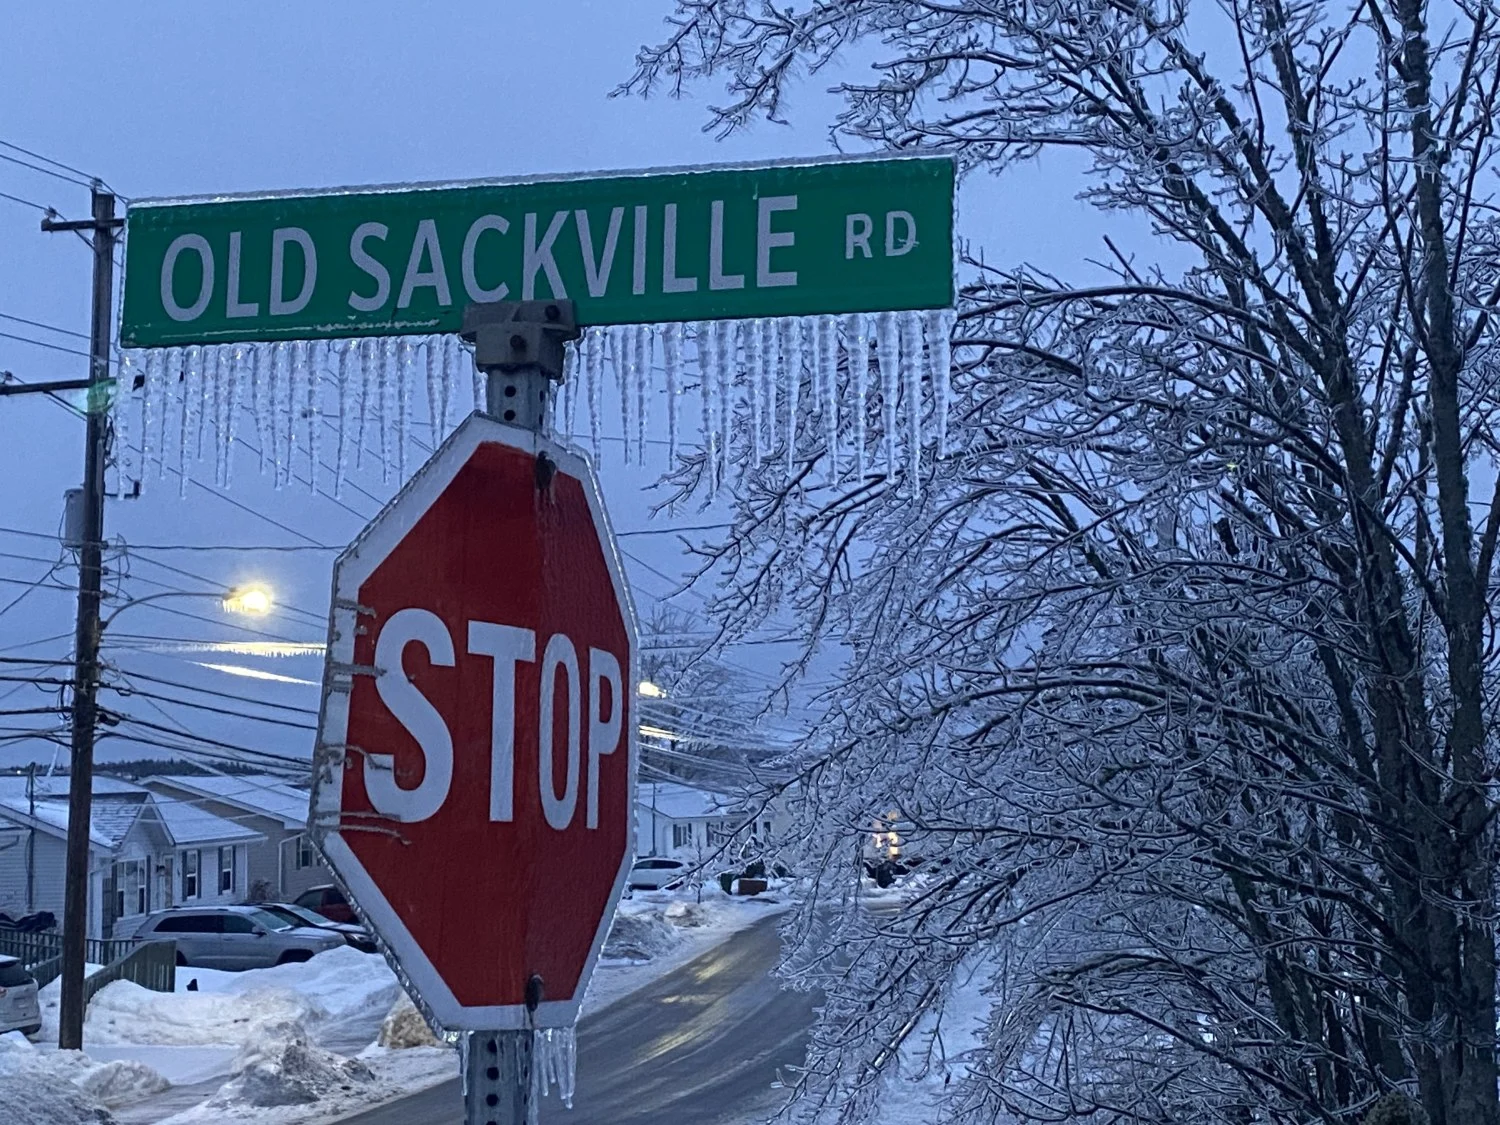 (NATHAN COLEMAN) Ice accretion from freezing rain in Middle Sackville, Nova Scotia